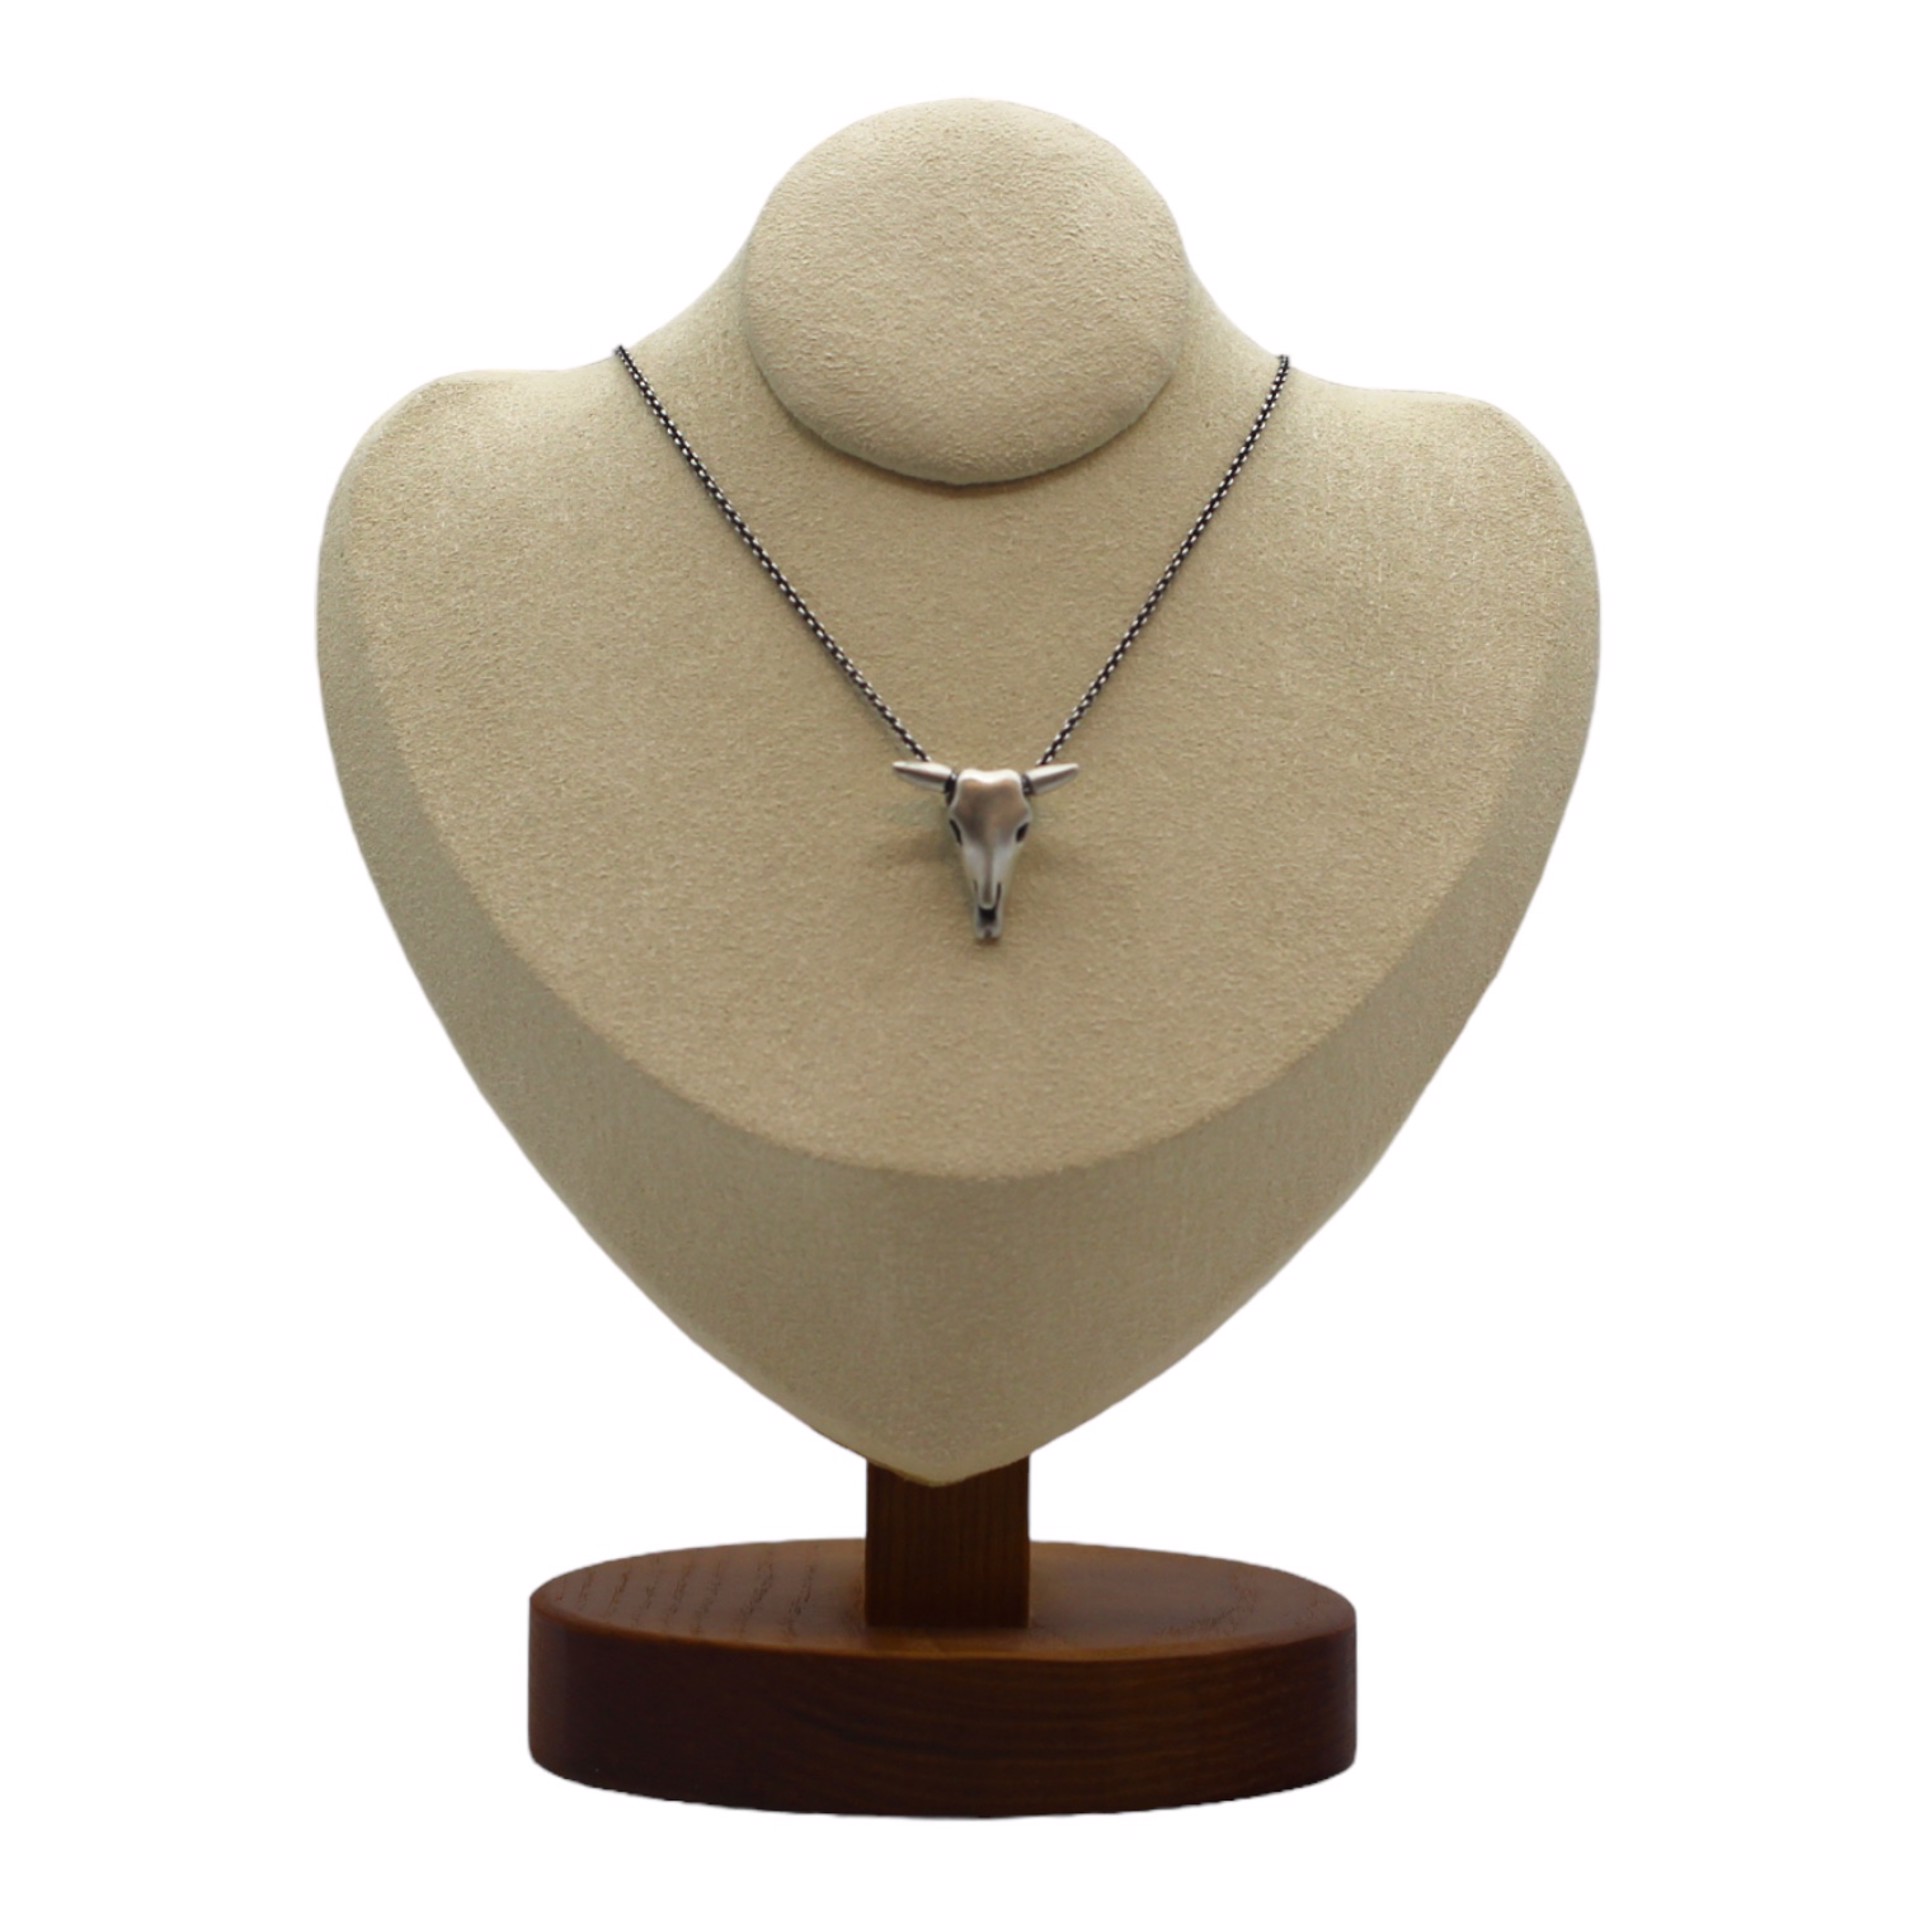 Petite Cow Skull Necklace - Brush Finish Silver by Louisa Berky